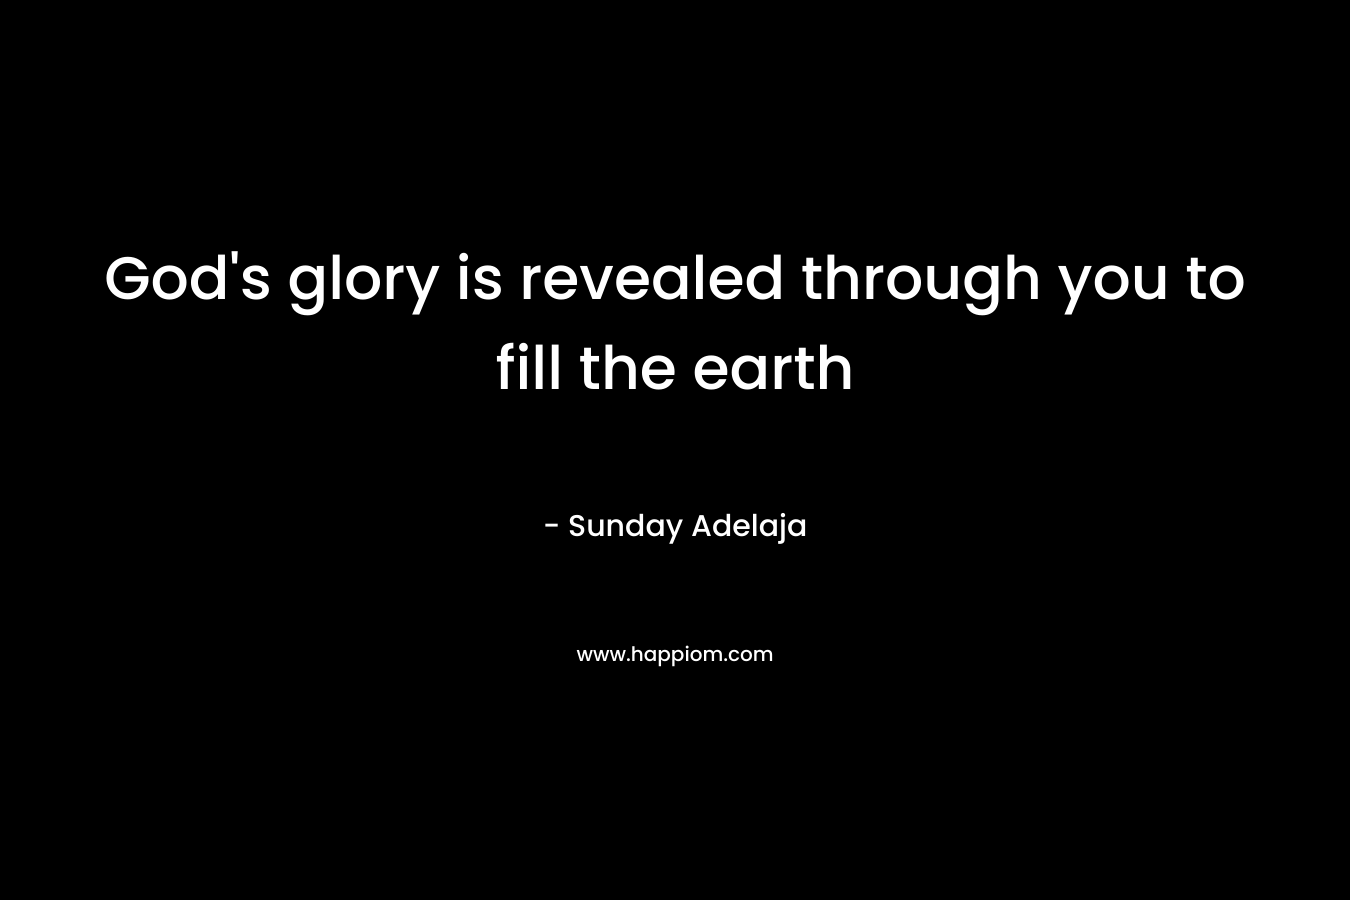 God's glory is revealed through you to fill the earth